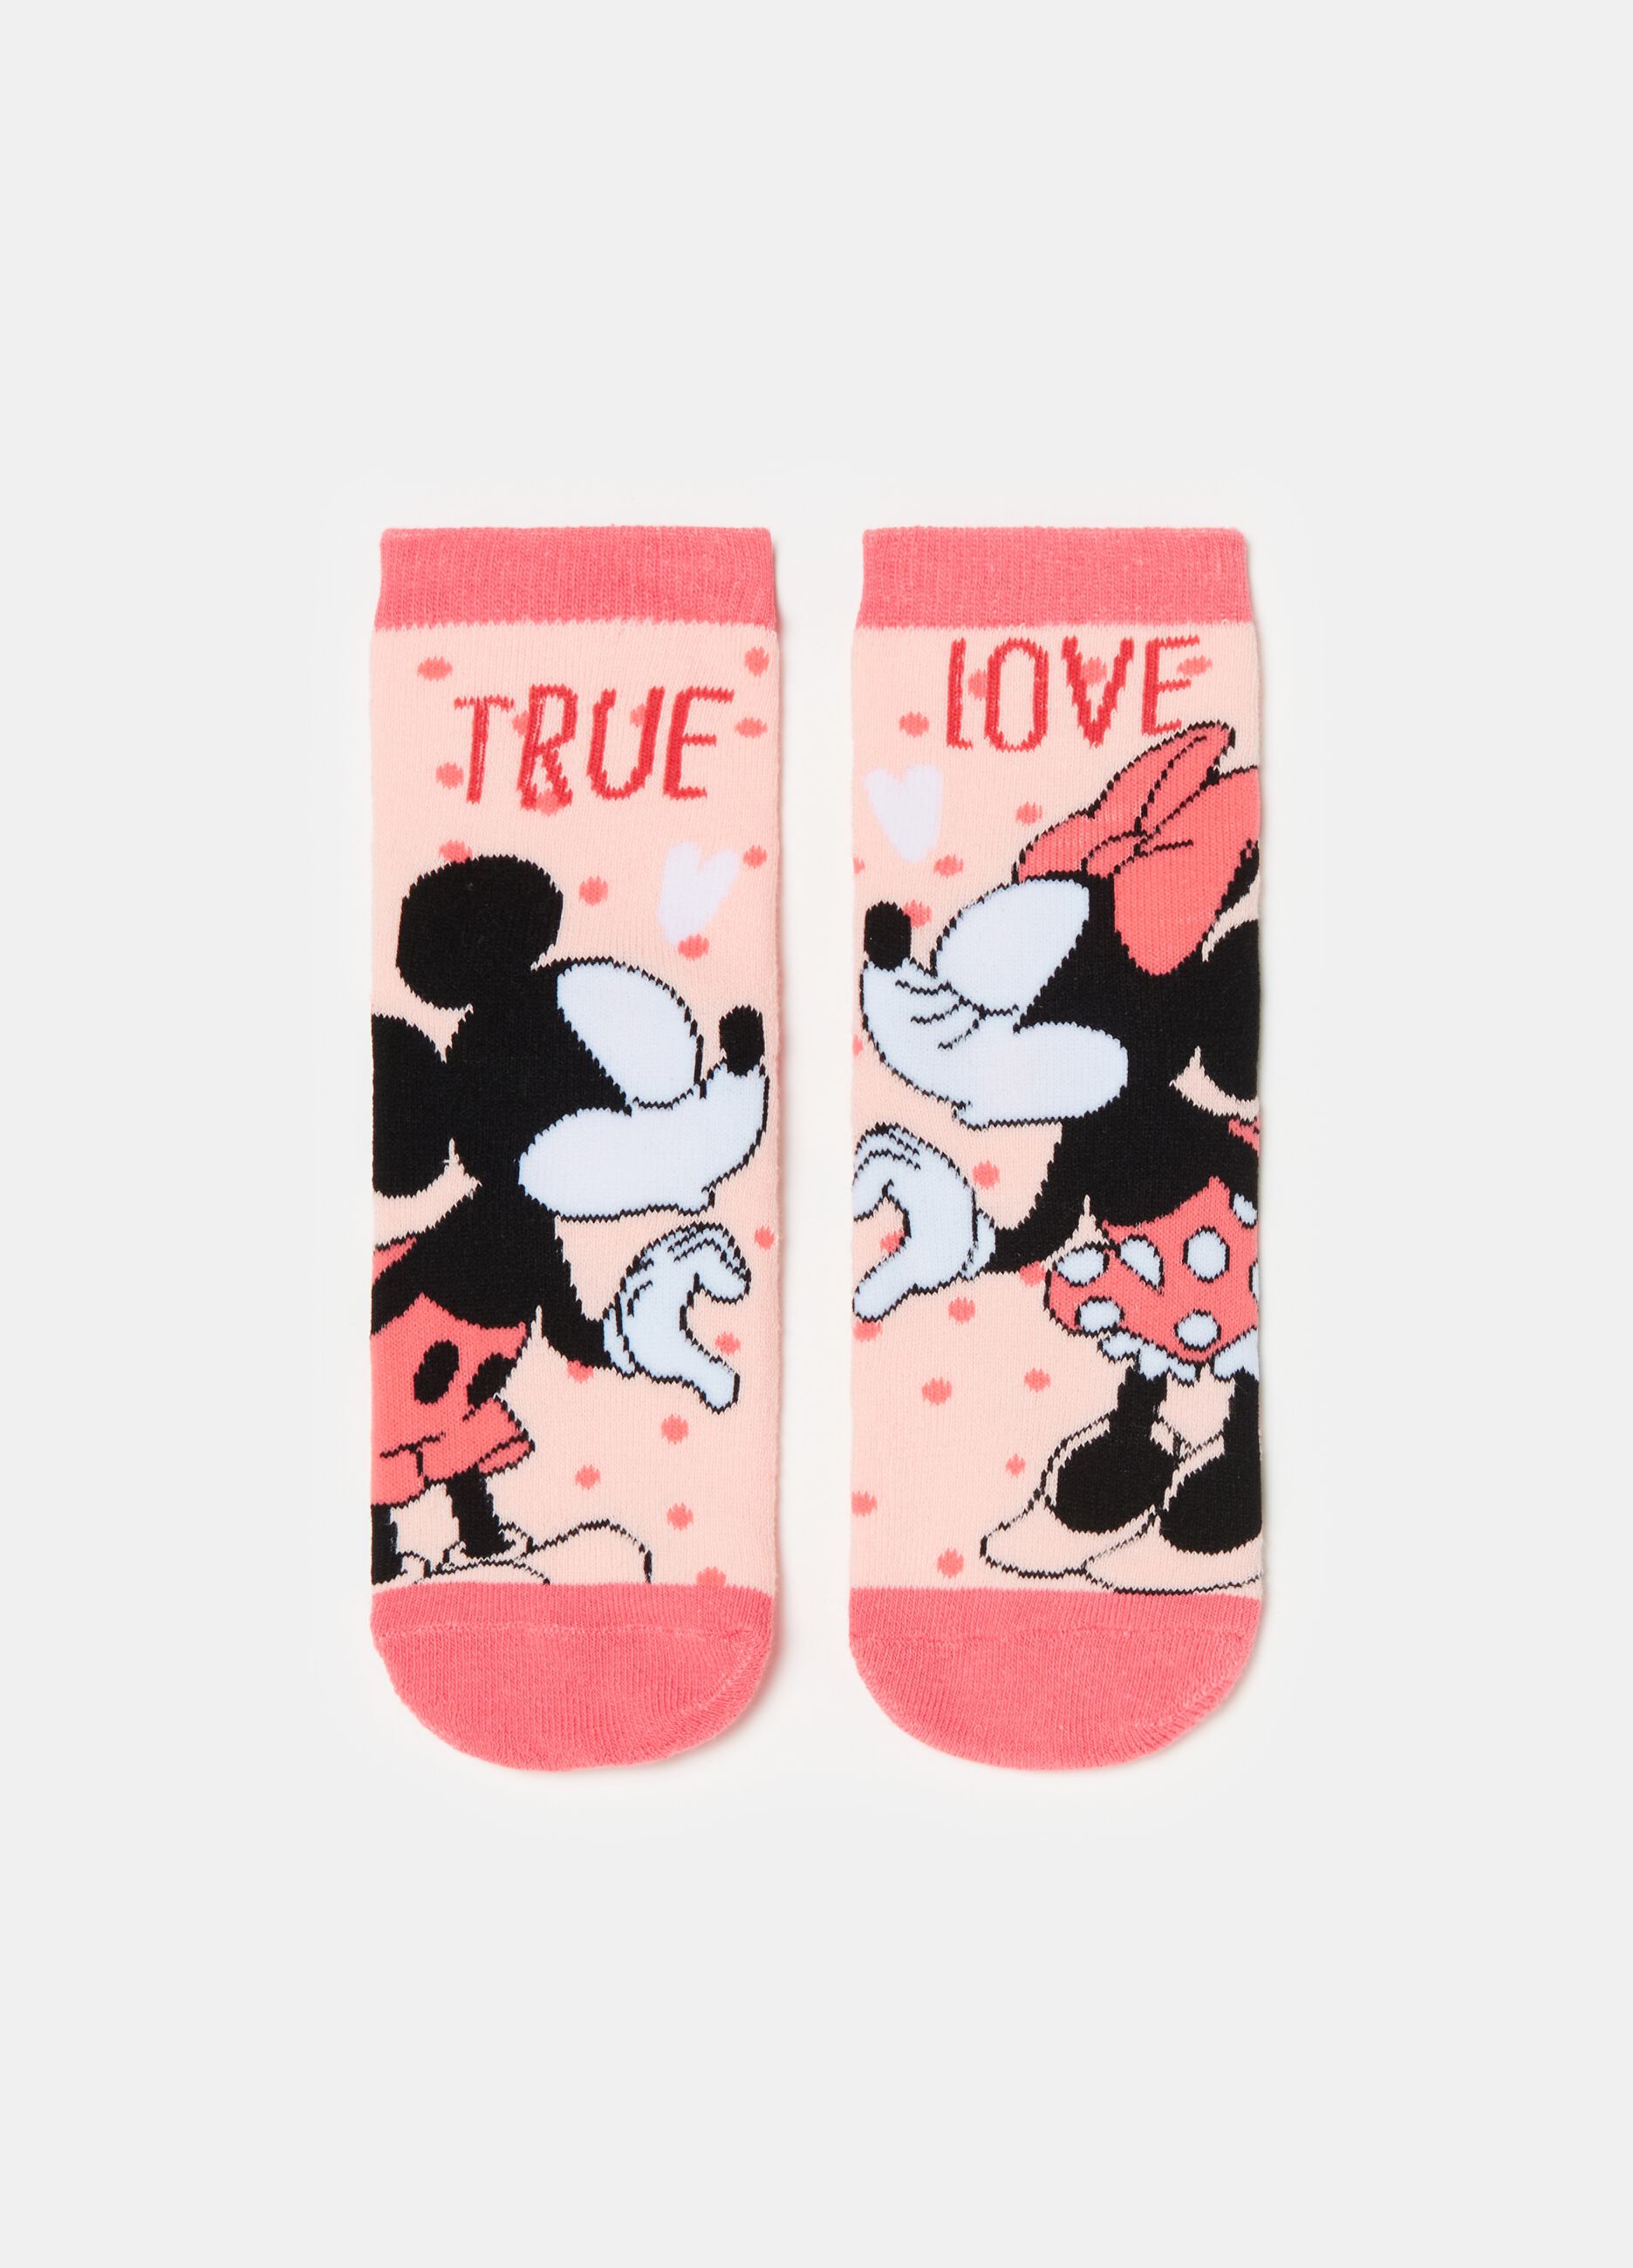 Minnie and Mickey Mouse slipper socks